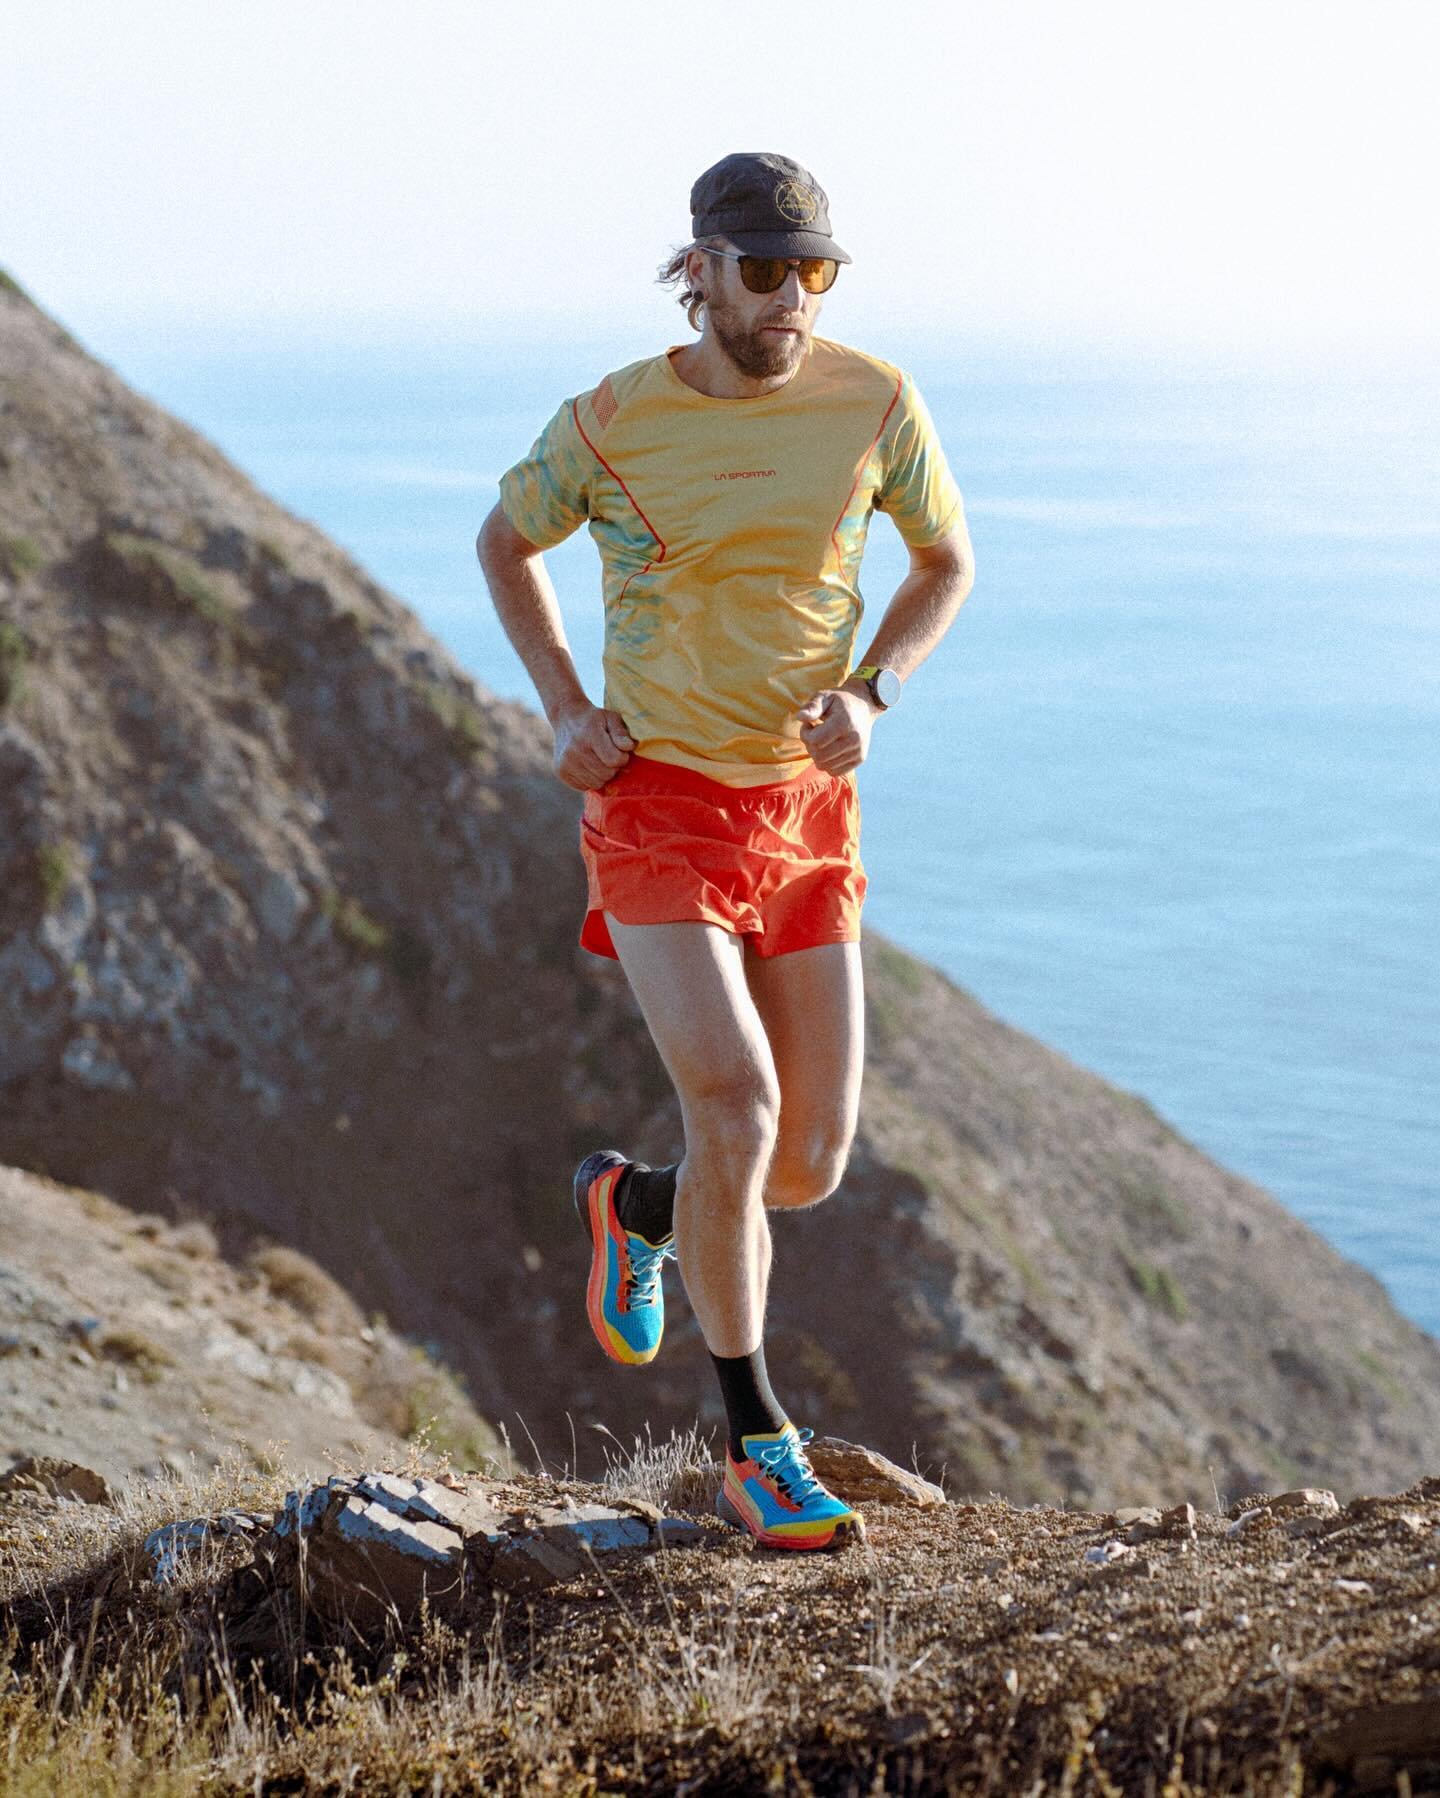 New work for @lasportivagram with @antonkrupicka for the launch of their all new Prodigio shoe. Last minute plans had us on Catalina Island for a mini mission, dodging cacti and rattlesnakes as we ran along these seaside mountain ridges. This was a q